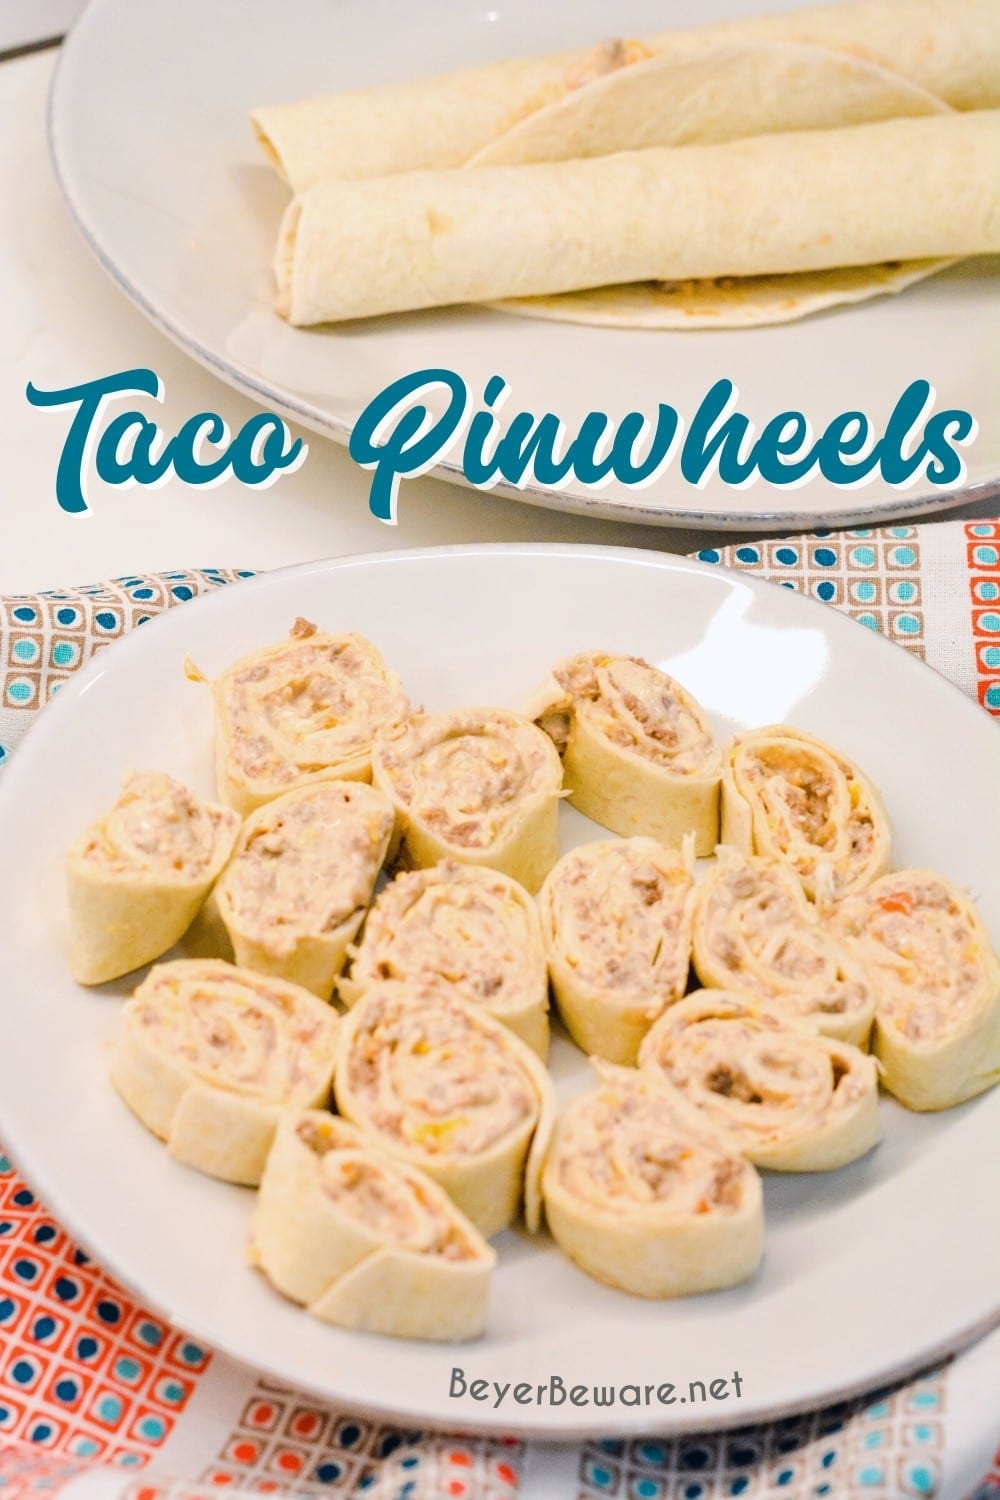 Taco pinwheels are the perfect way to use up leftover taco meat and tortilla shells in a different way than just as tacos again by simply mixing cream cheese, salsa, and taco meat together and spreading over the tortilla shell before rolling up into a pinwheel.